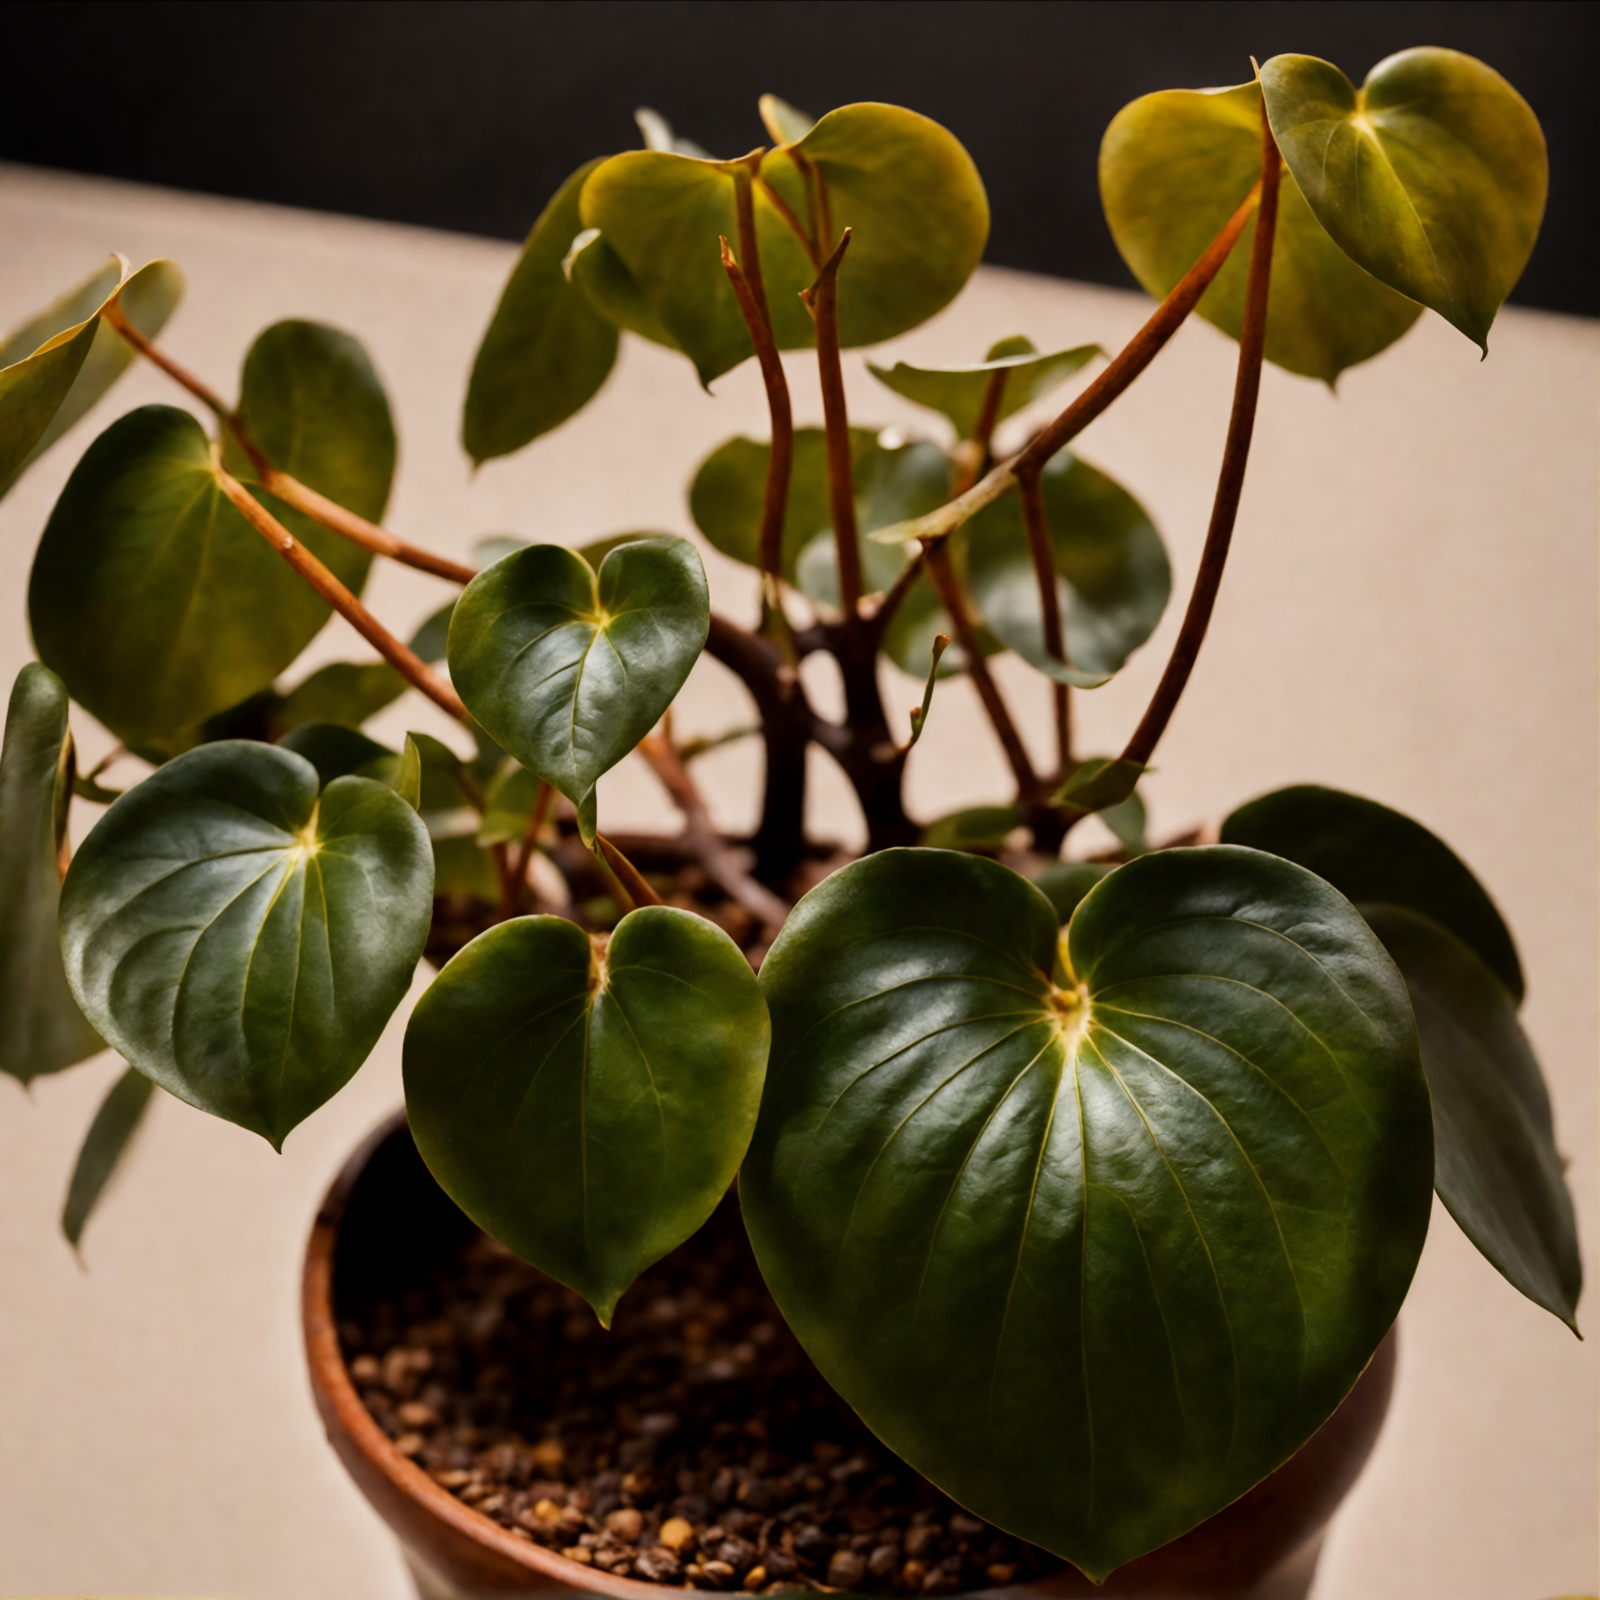 Peperomia polybotrya with heart-shaped leaves in a bowl planter, clear indoor lighting, dark background.